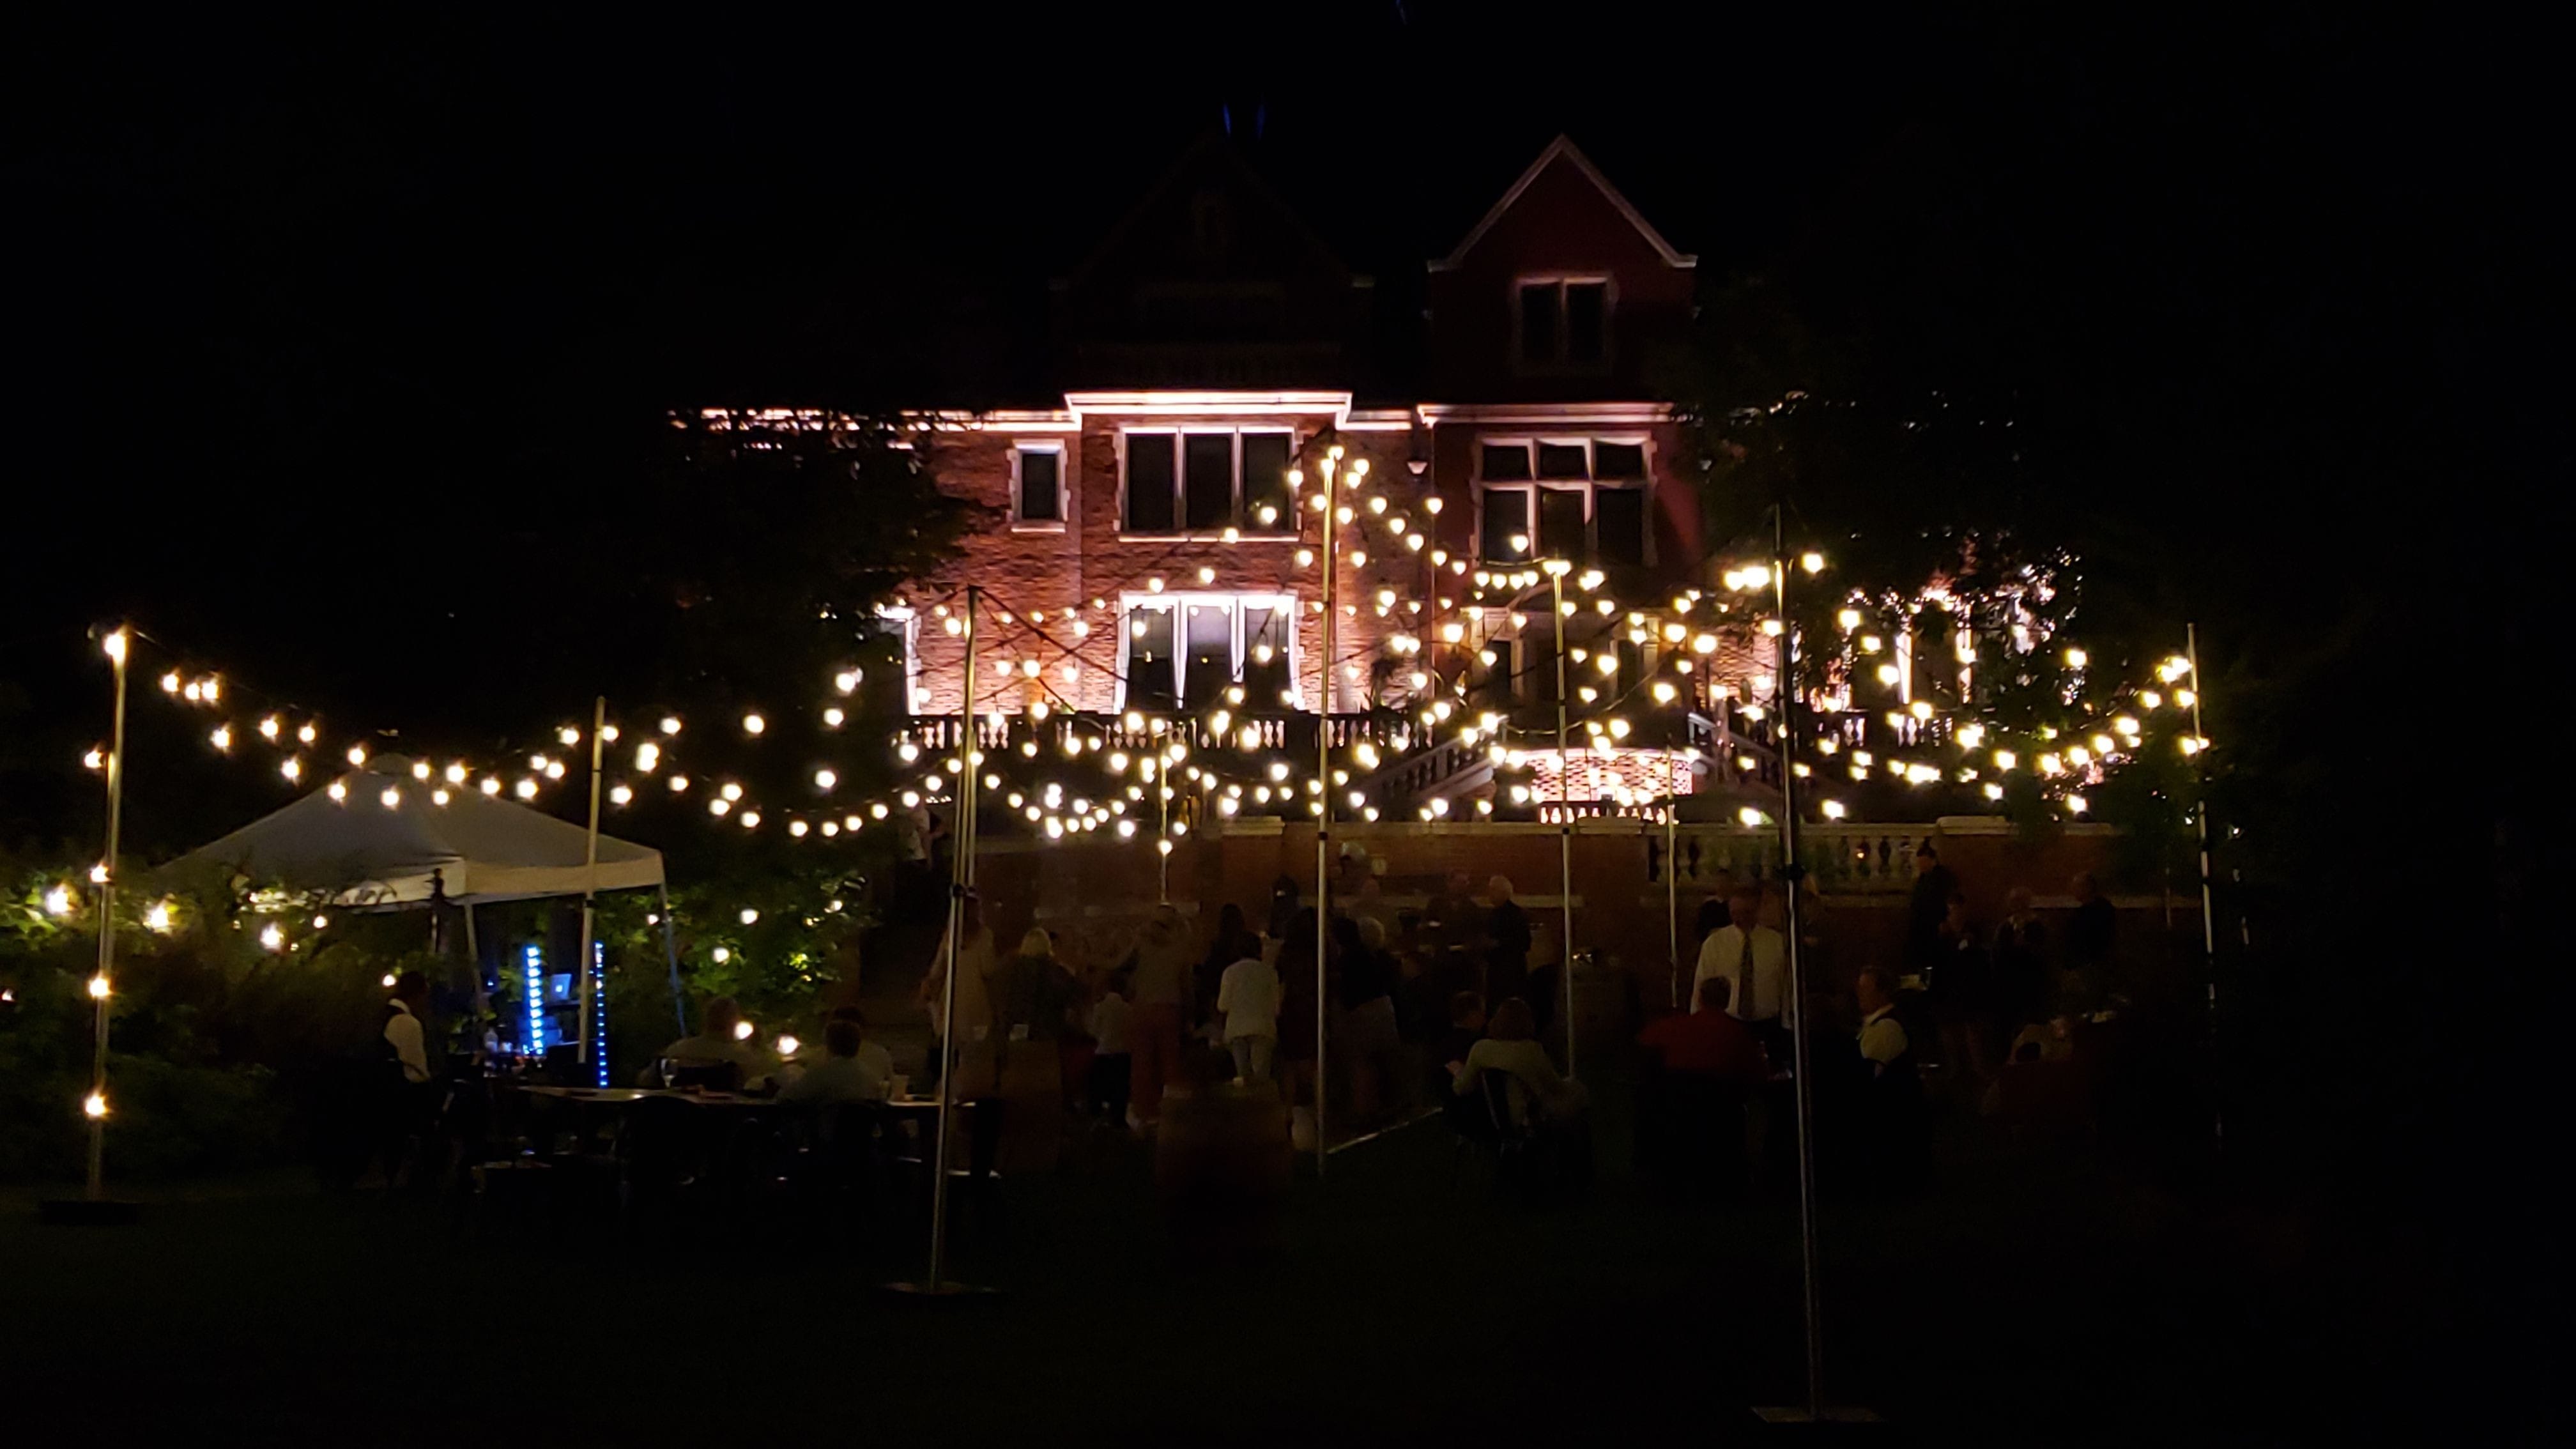 The back side of Glensheen Mansion lit for a wedding in the garden with a bistro tent.